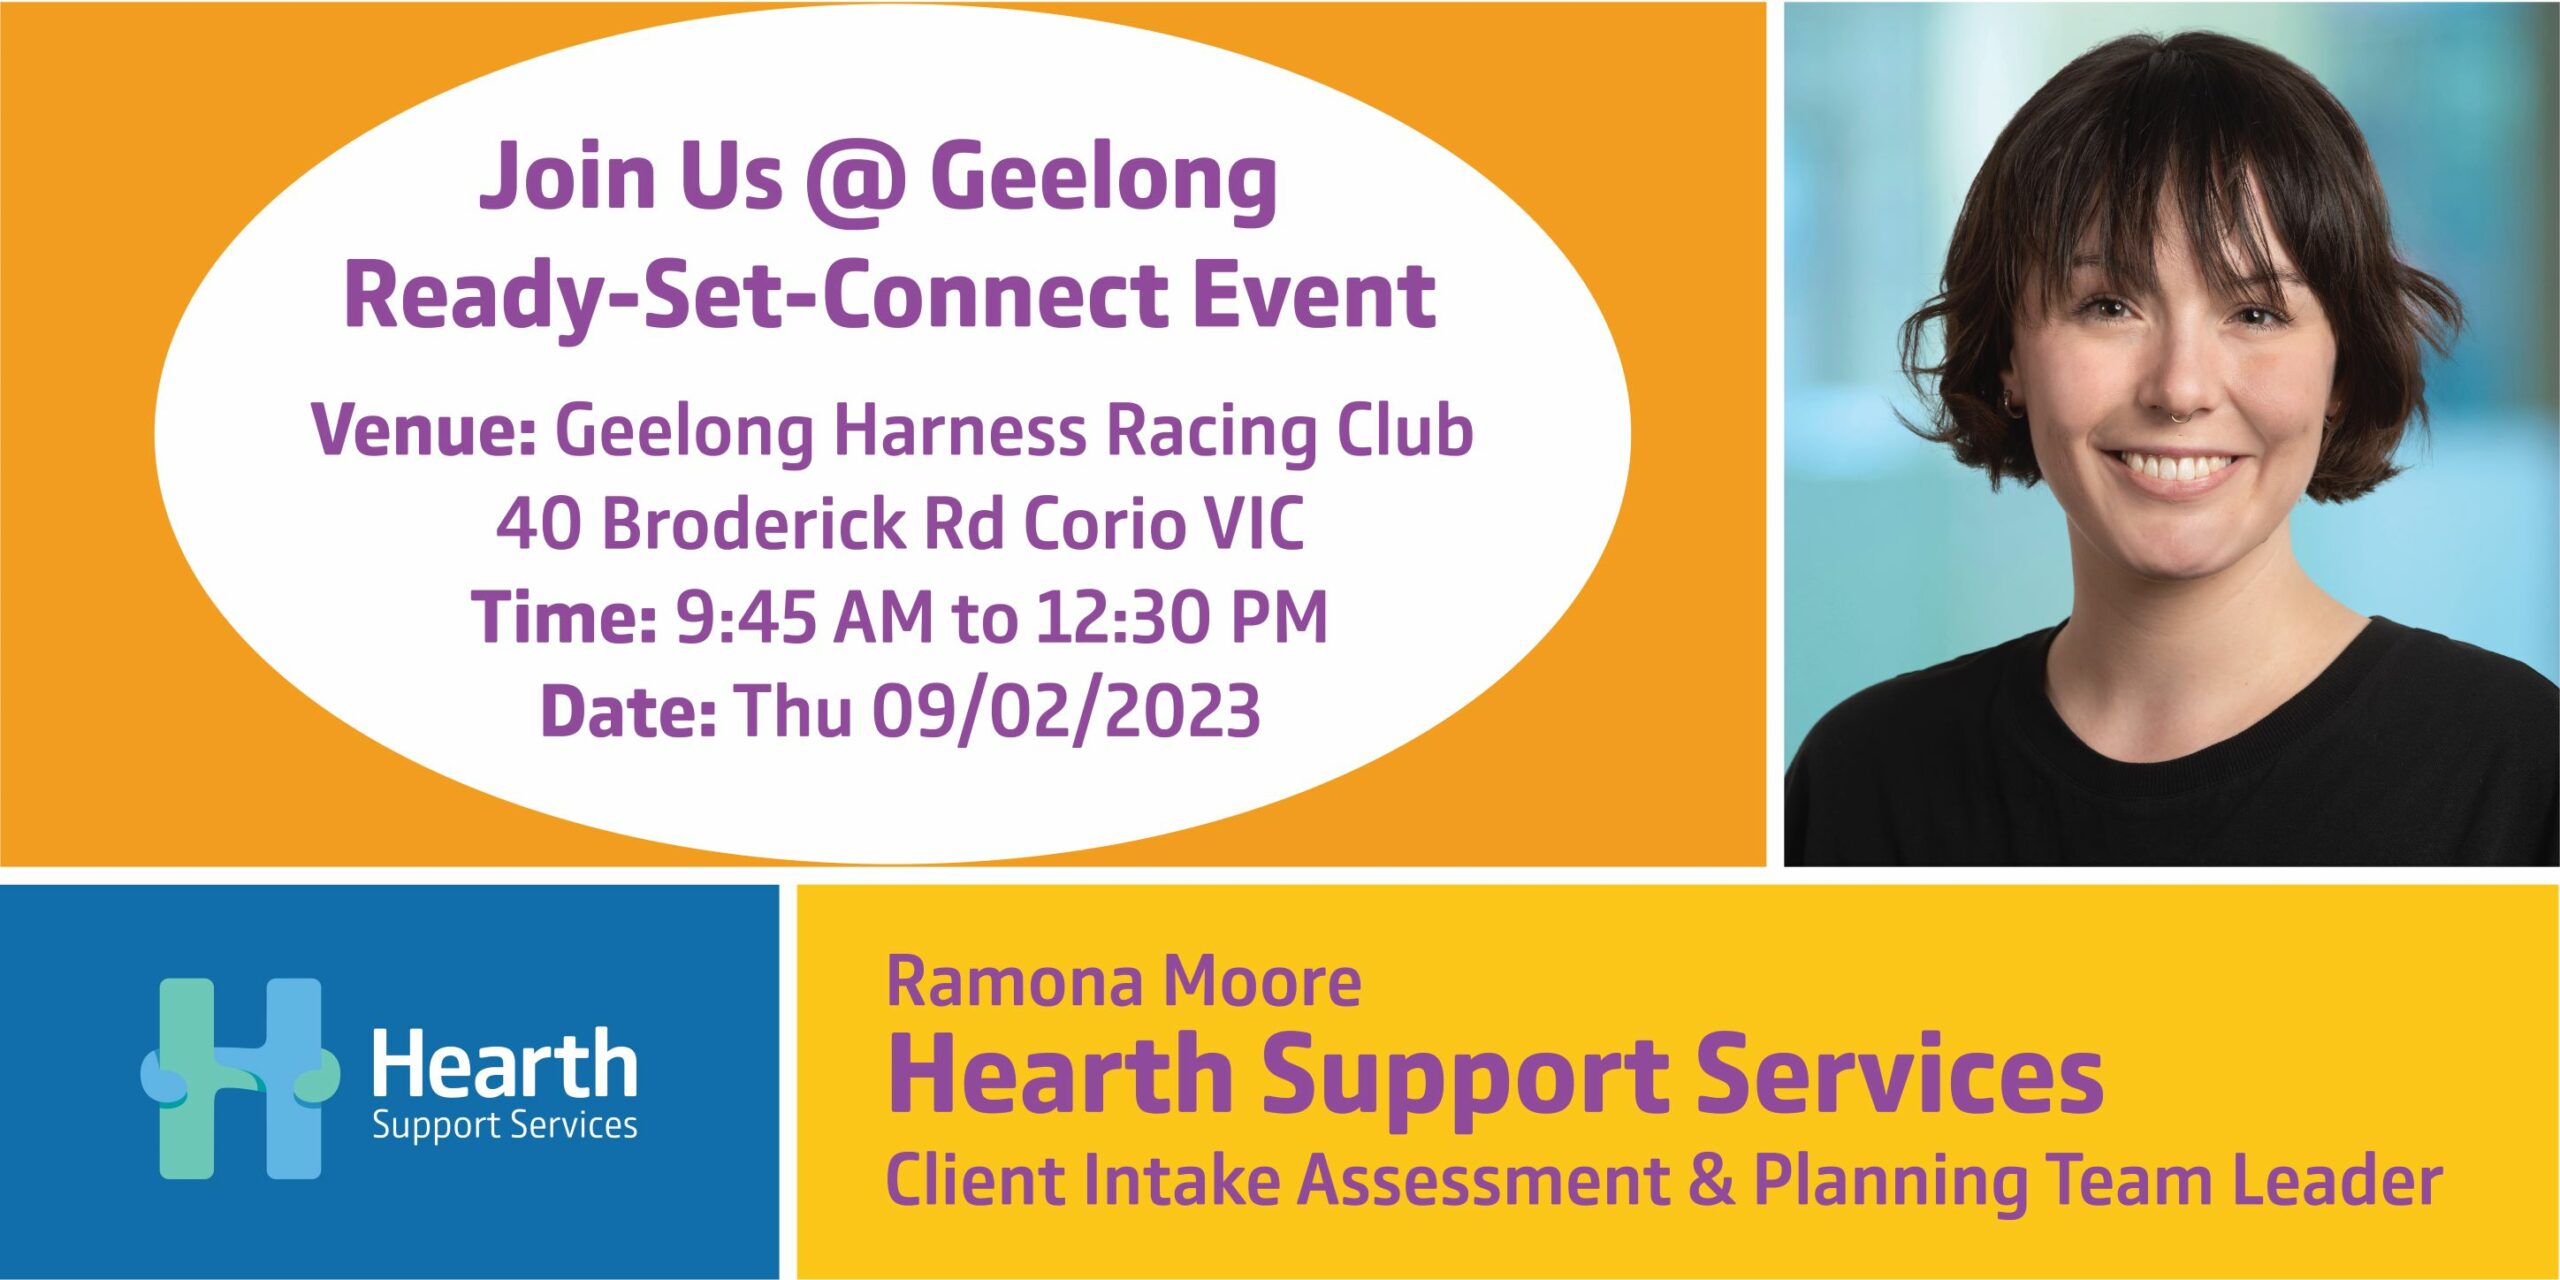 Join Hearth Support Services at the Geelong Ready Set Connect Event on Thursday, February 9th, 2023!